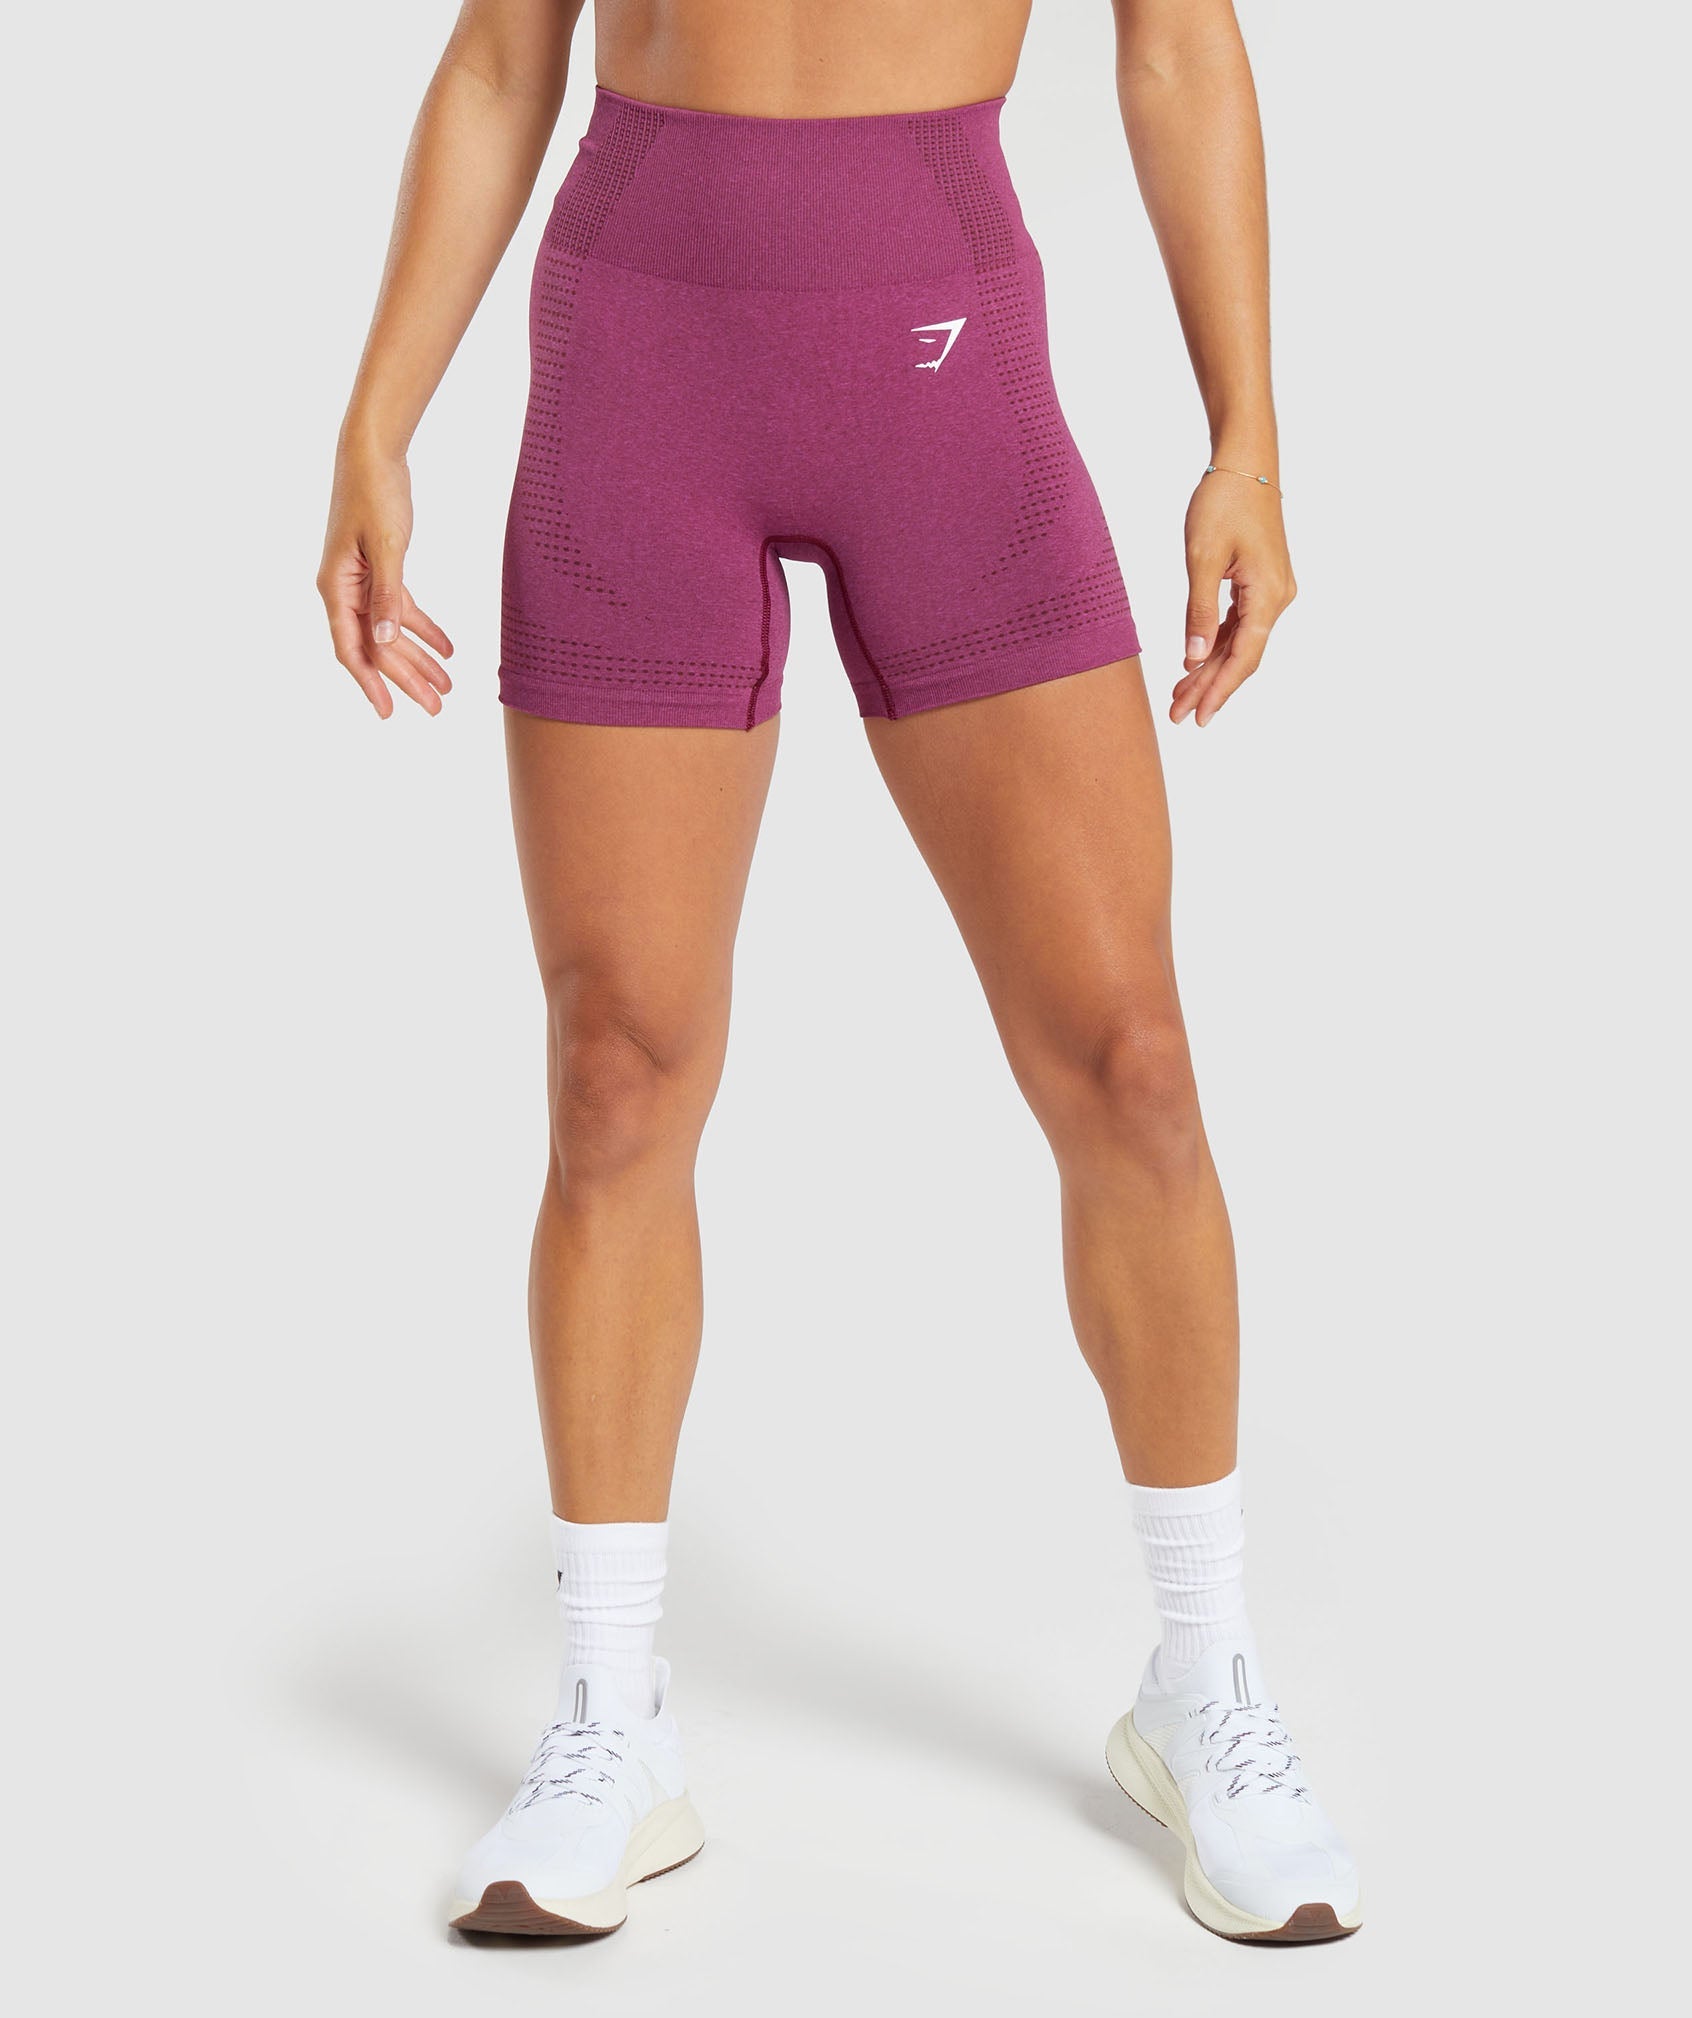 Women's Athletic Shorts - Compression Fit in Red